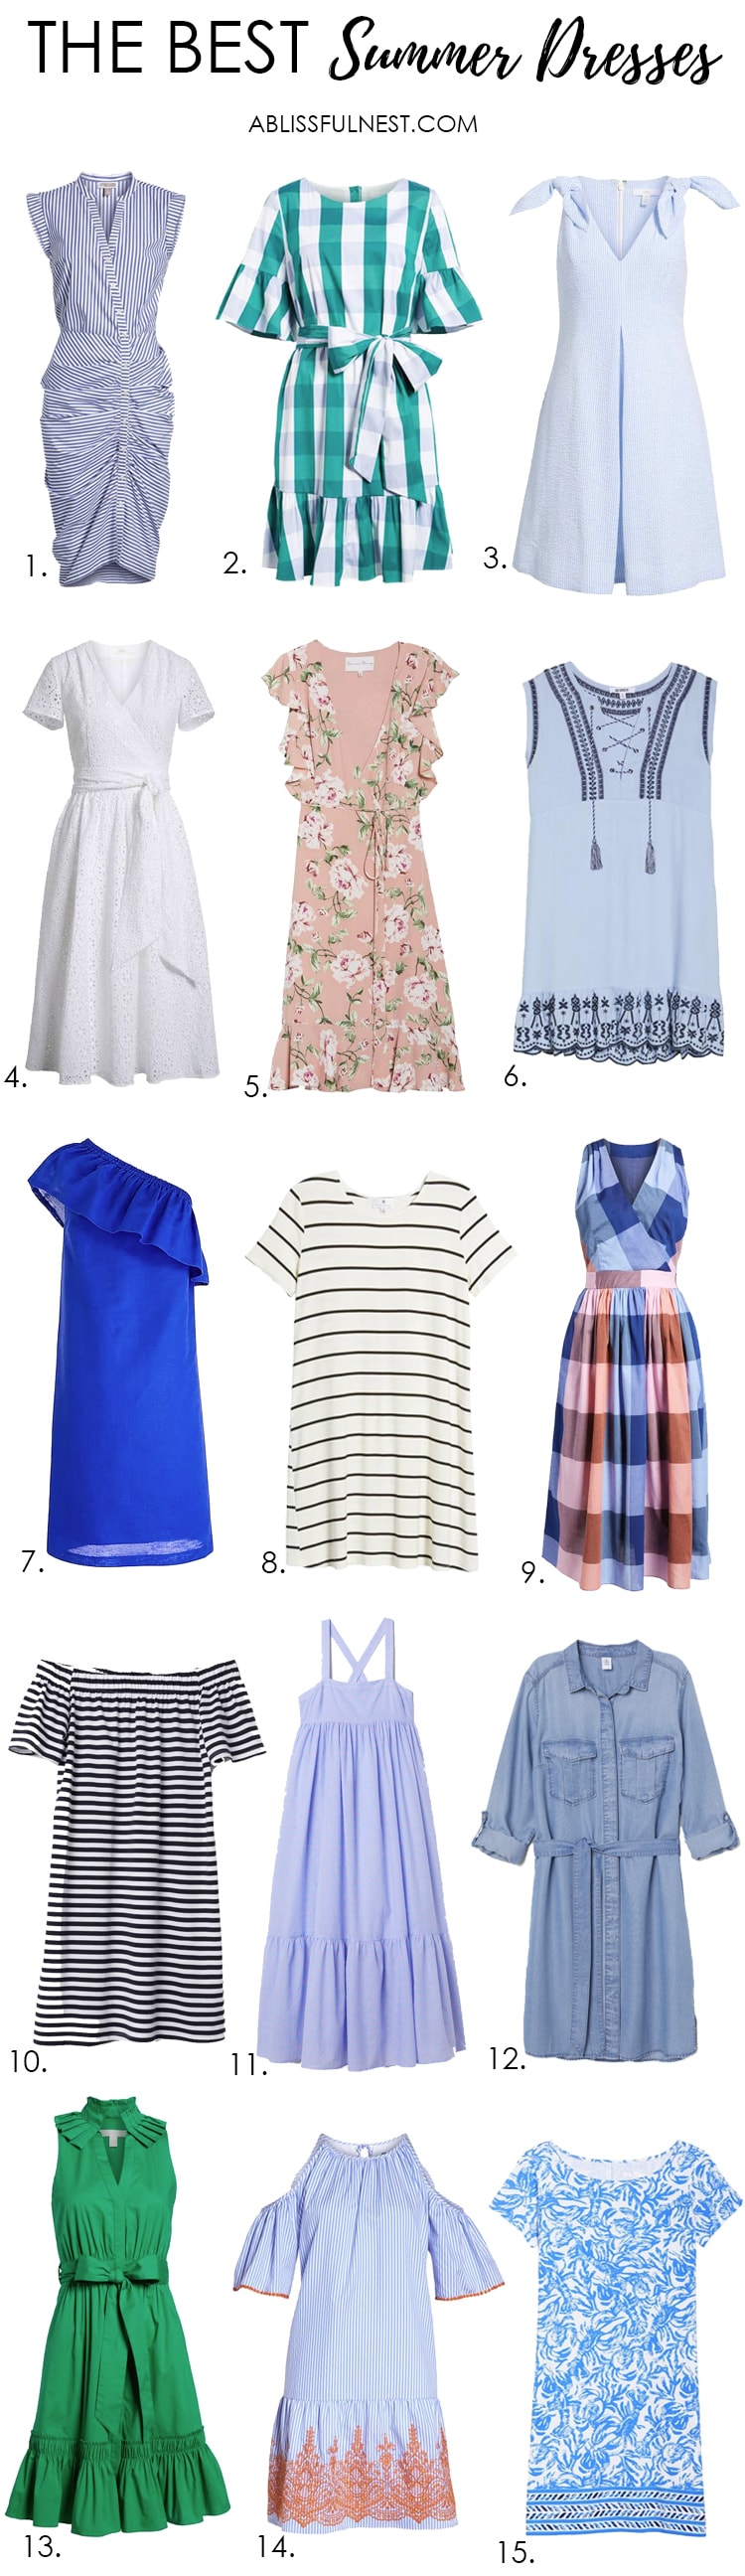 15 Summer Dresses to Stock Up On